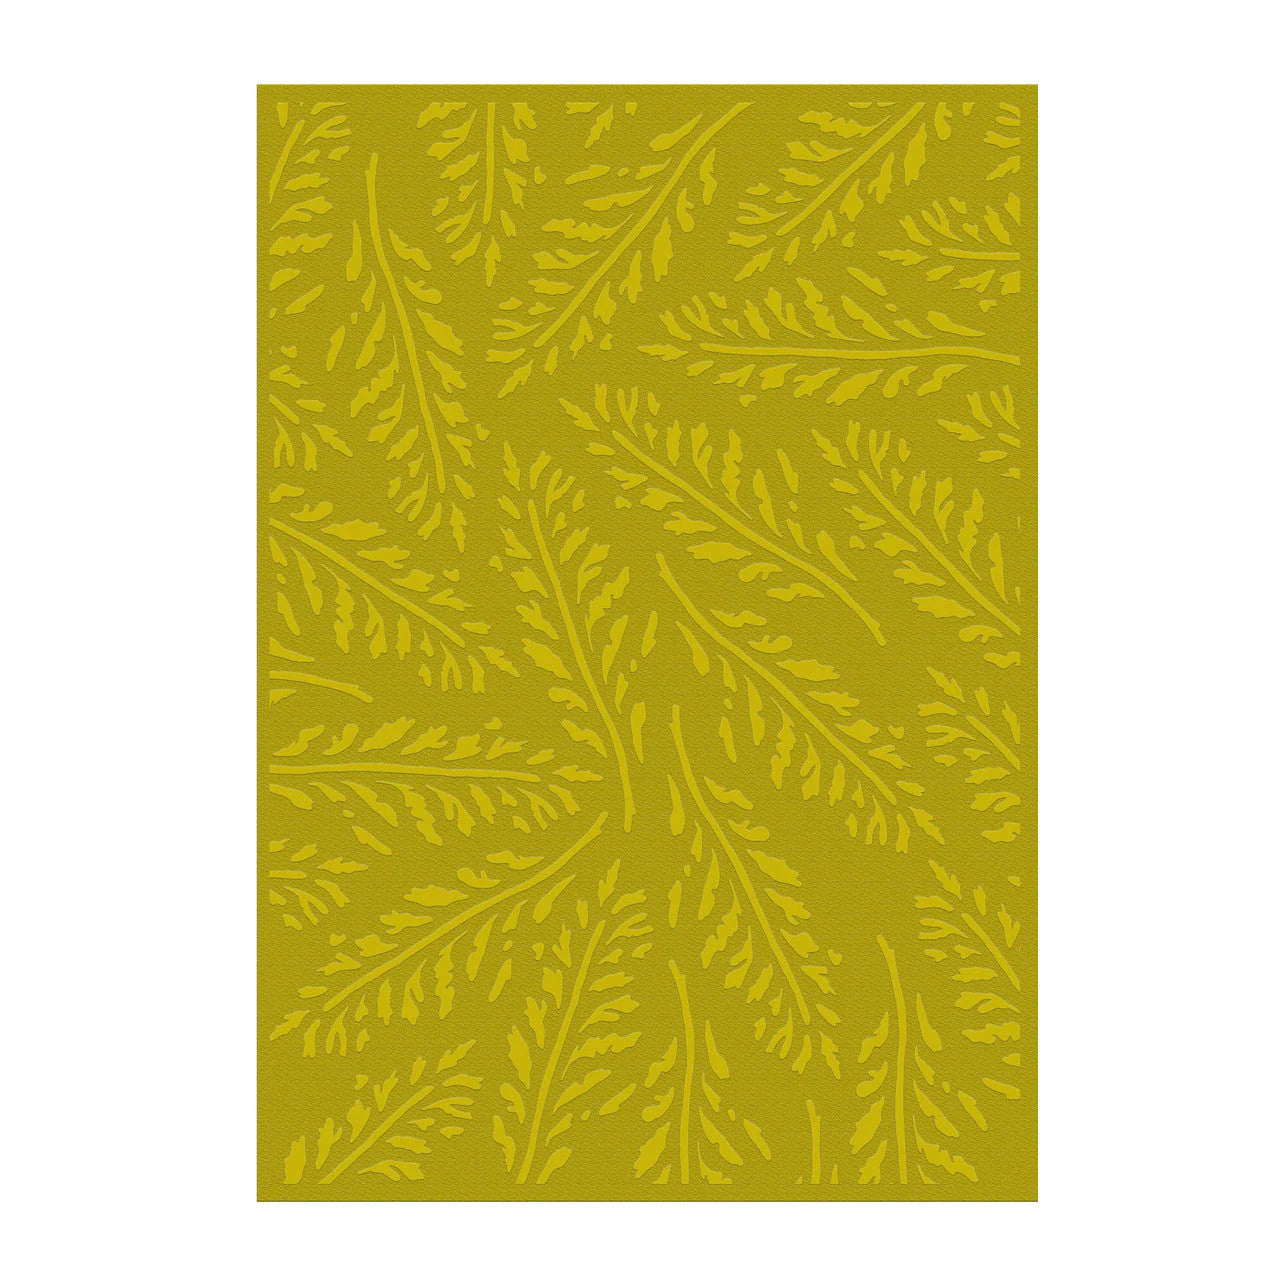 Couture Creations - Earthy Delights Fern Leaf Embossing Folder